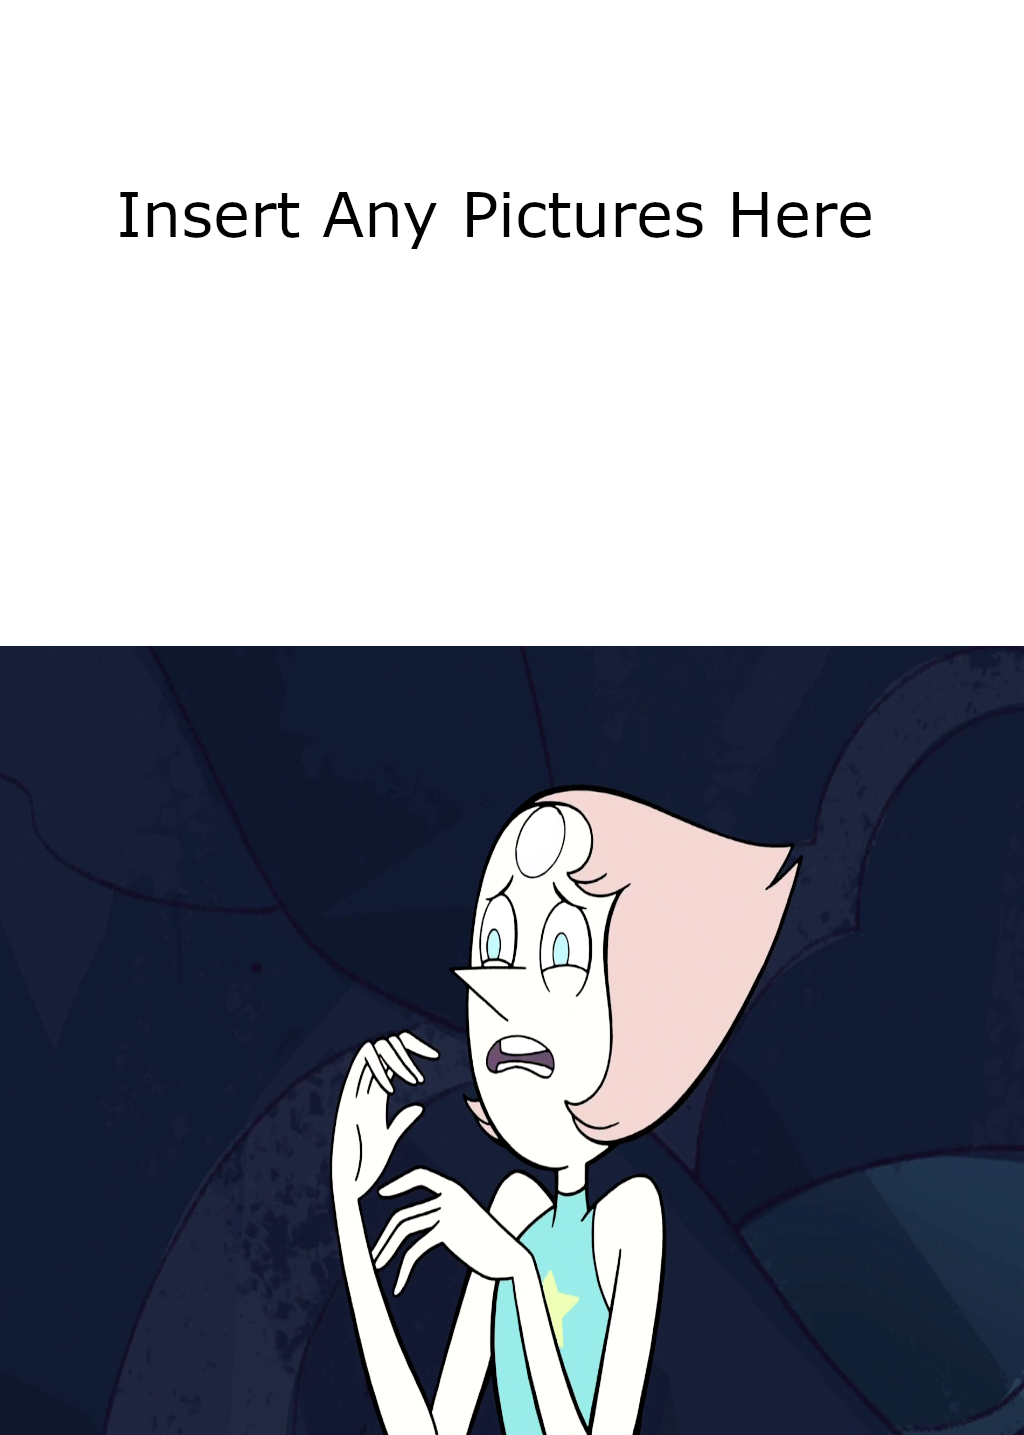 Pearl Disgusted By Who Blank Meme by Combusto82 on DeviantArt